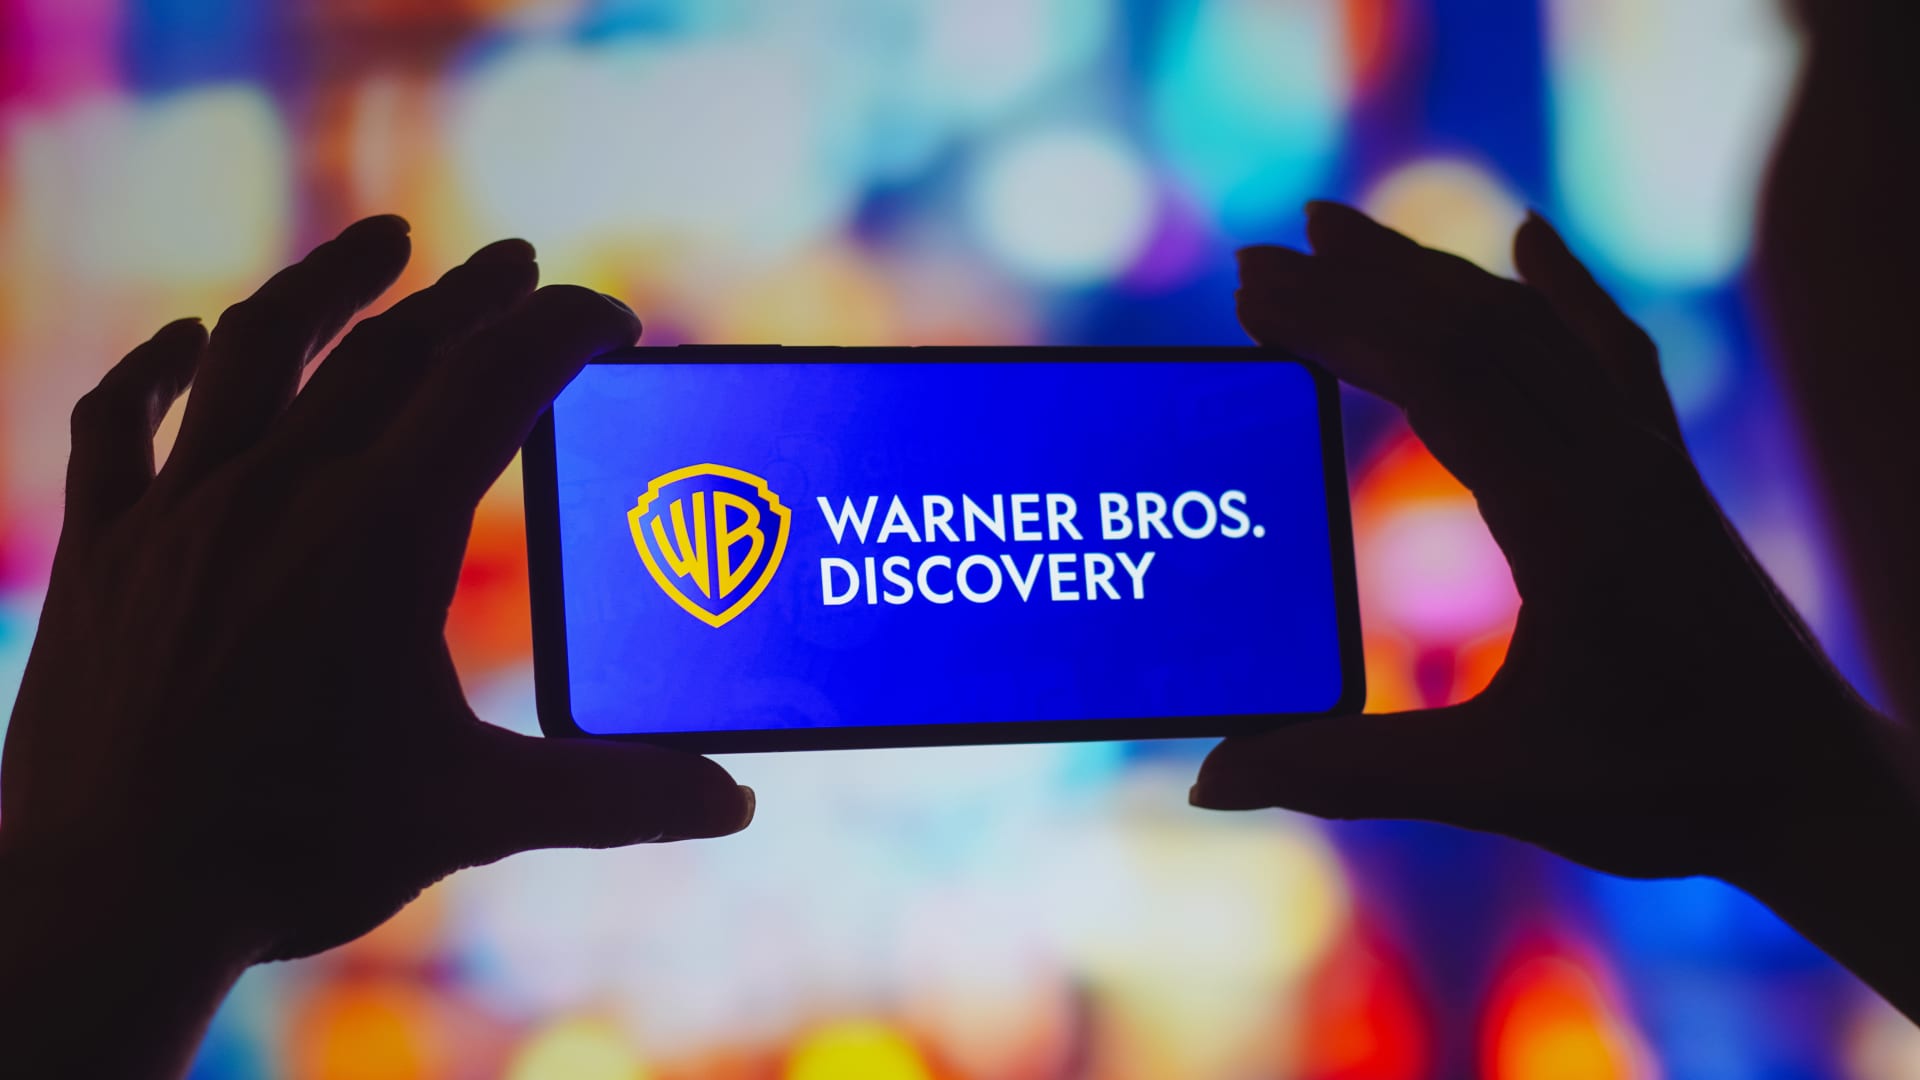 In this photo illustration, the Warner Bros. Discovery logo is displayed on a smartphone screen.